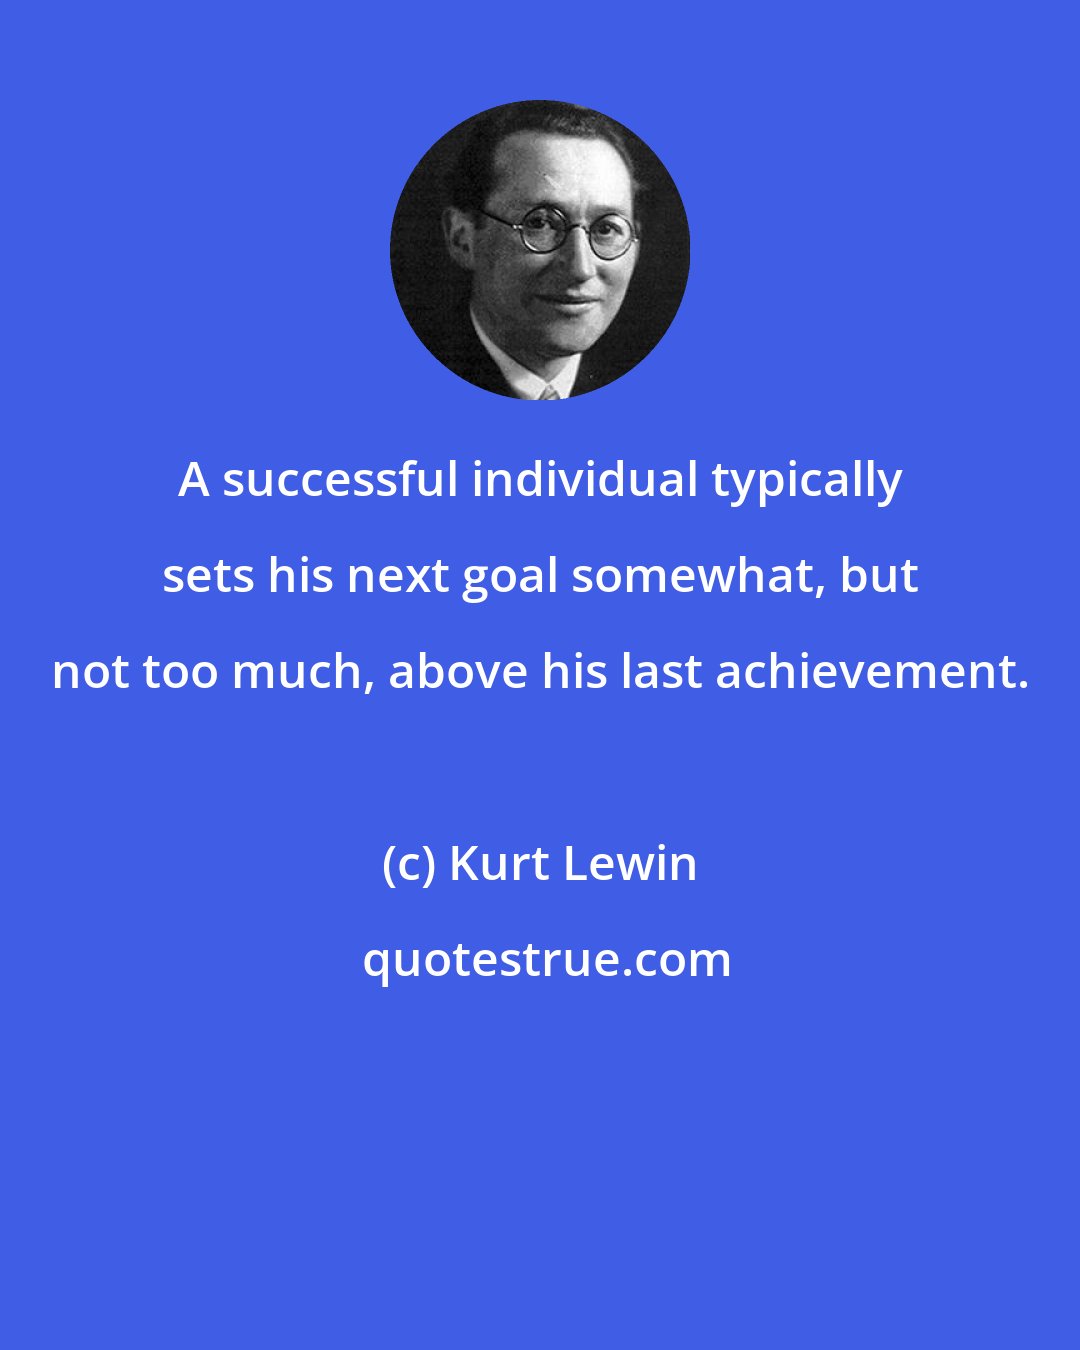 Kurt Lewin: A successful individual typically sets his next goal somewhat, but not too much, above his last achievement.